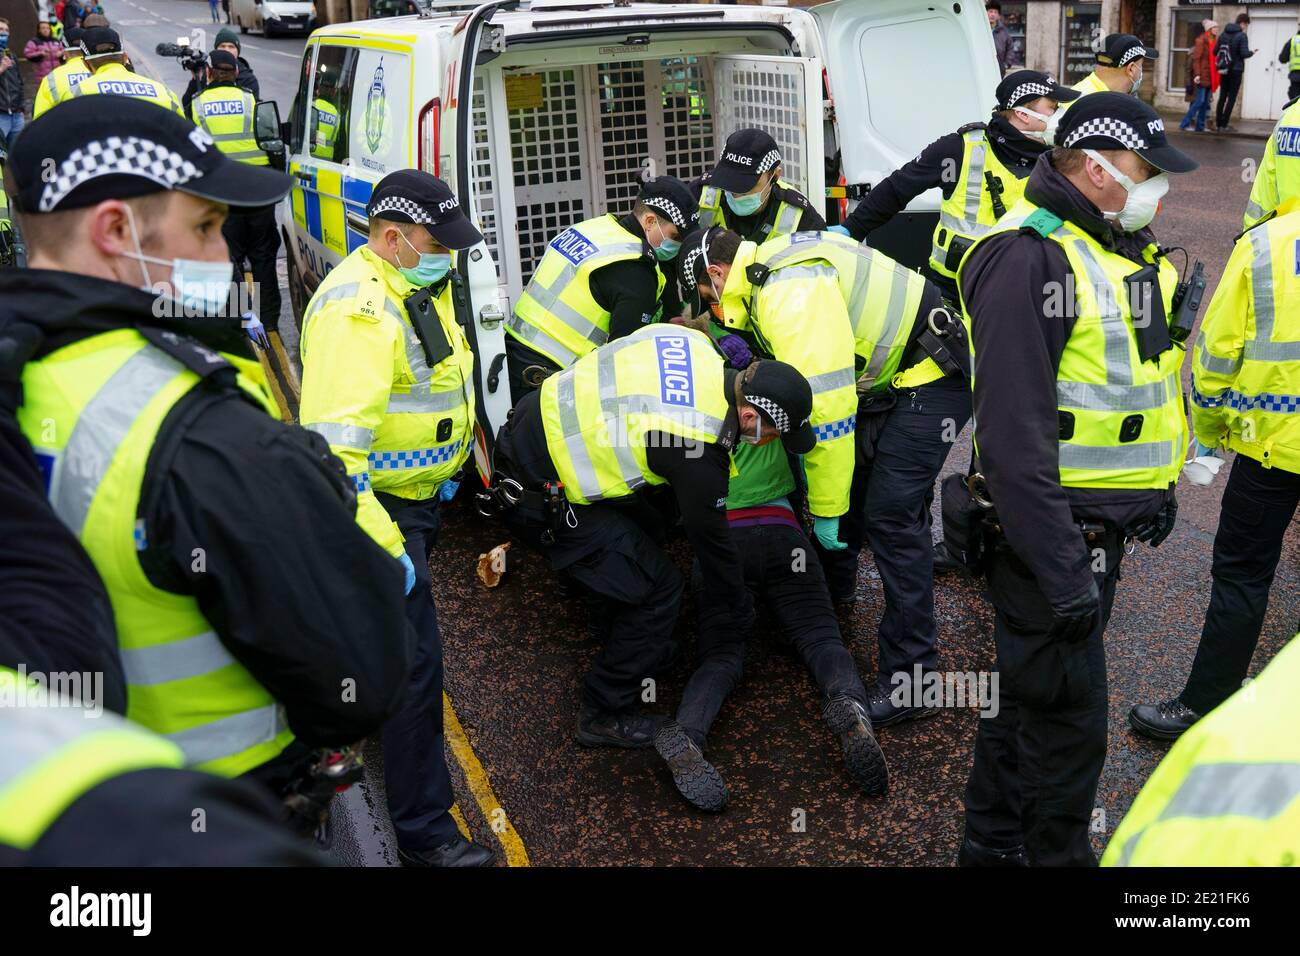 Edinburgh, Scotland, UK. 11 January 2021. Protester arrested in violent scenes at anti lockdown demonstration at Scottish Parliament in Edinburgh today. Several protesters took part but  a heavy and aggressive police presence prevented demonstration and planned march to Bute House. During national Covid-19 lockdown such protests are illegal and police advised people not to attend the demonstration. Iain Masterton/Alamy Live News Stock Photo